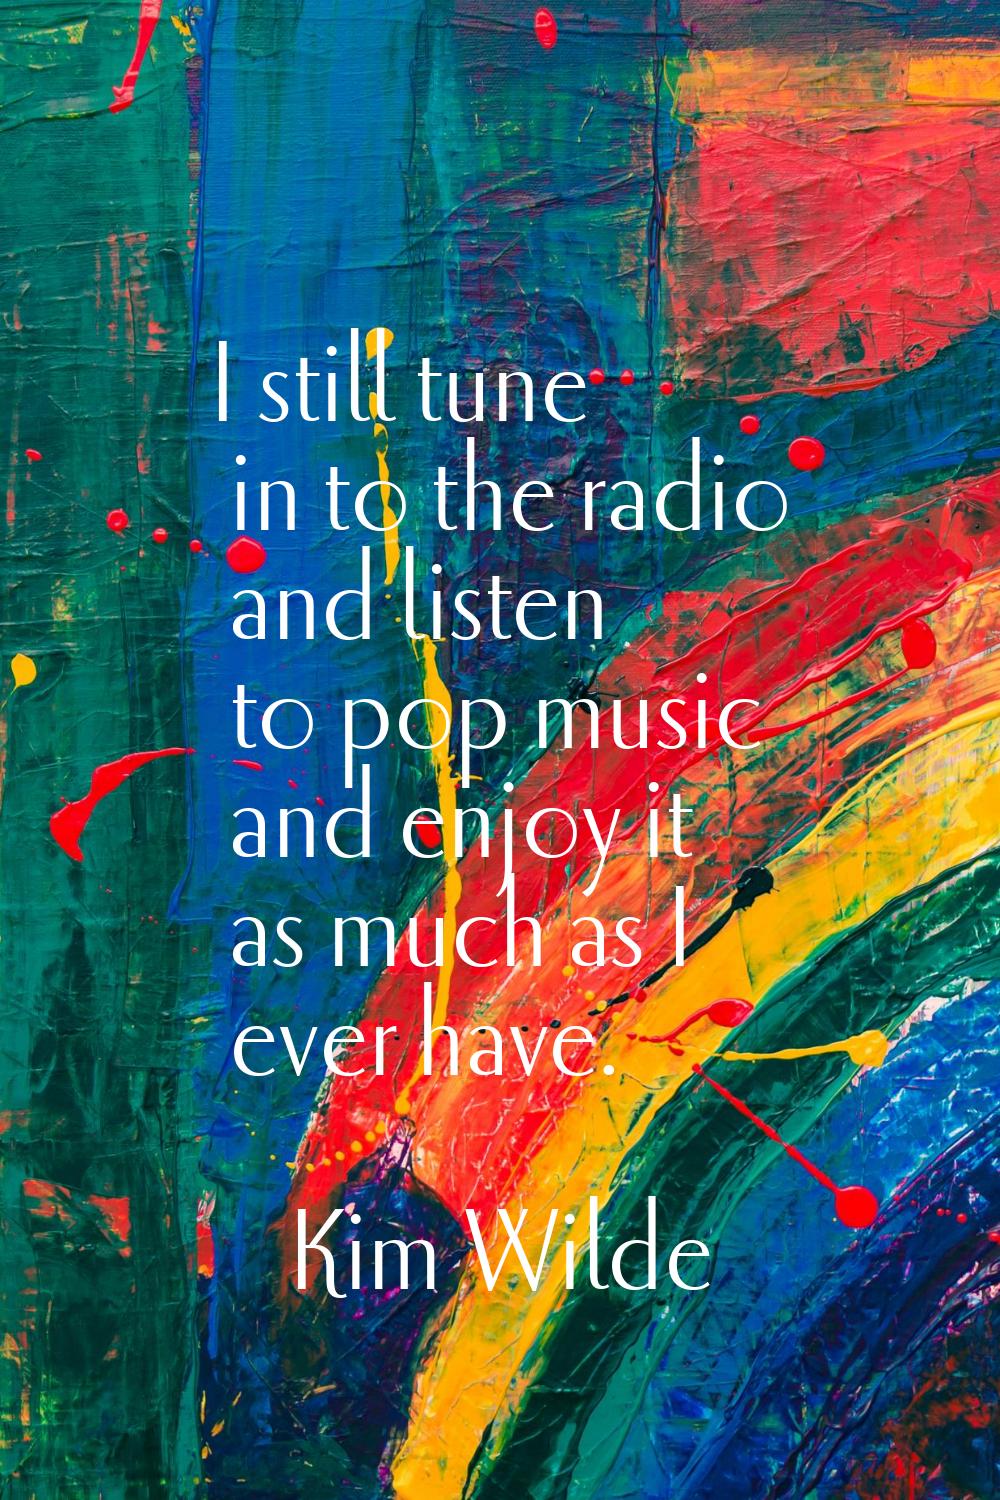 I still tune in to the radio and listen to pop music and enjoy it as much as I ever have.